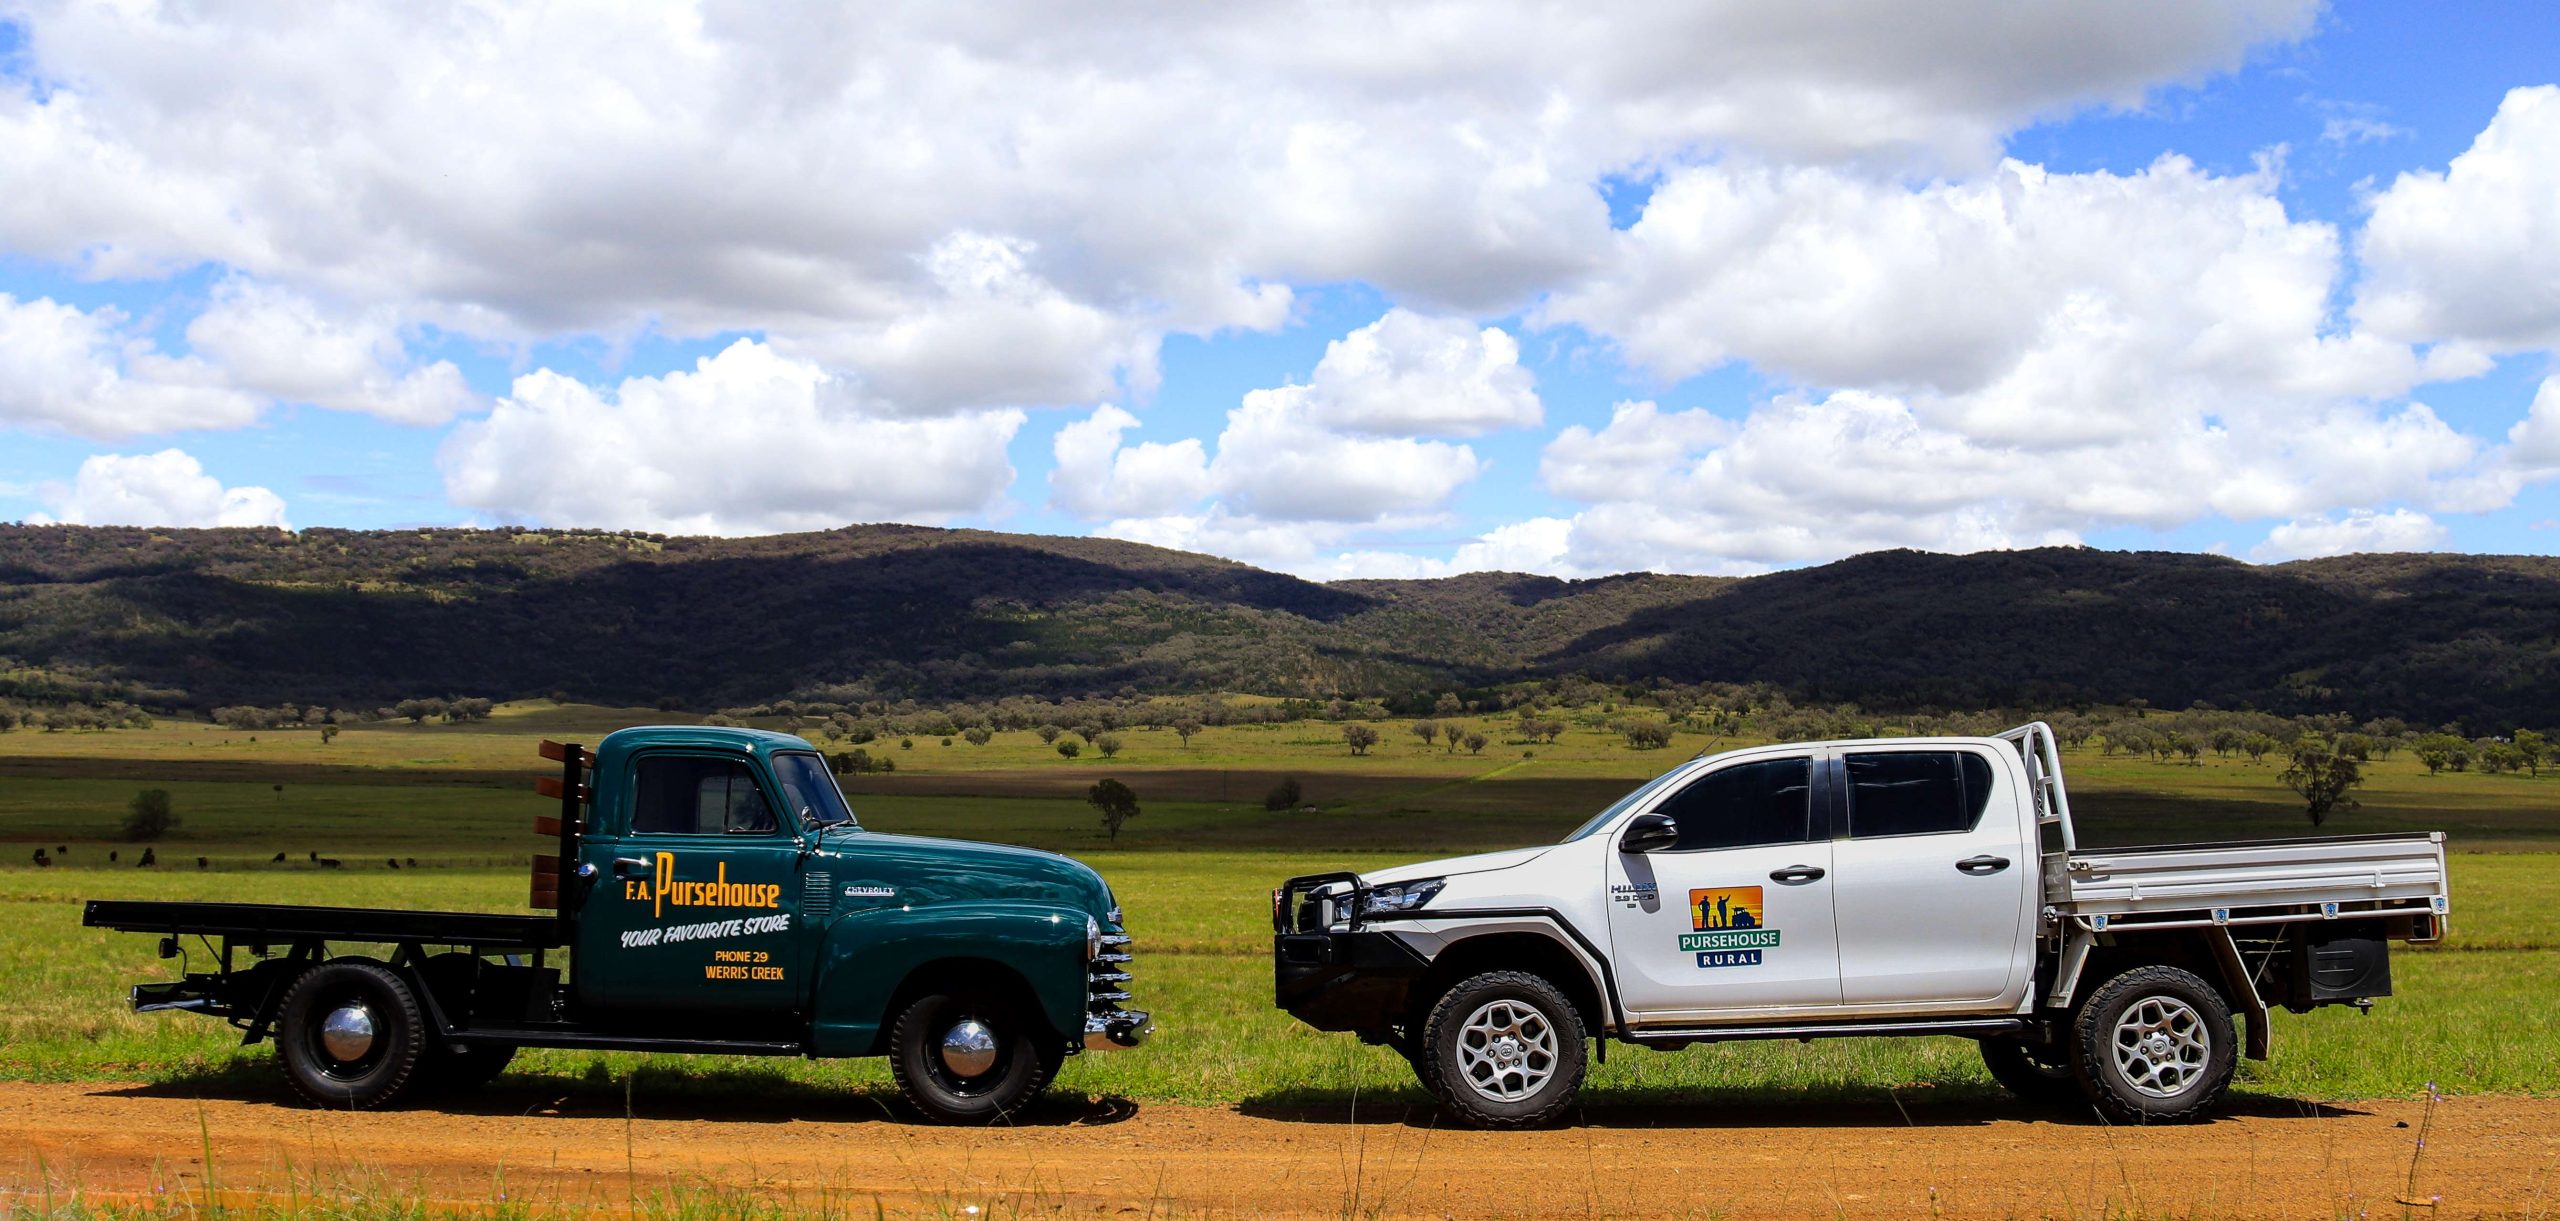 Old Pursehouse Rural Chevrolet truck faces new pursehouse rural Hilux ute in front of green paddock and hills